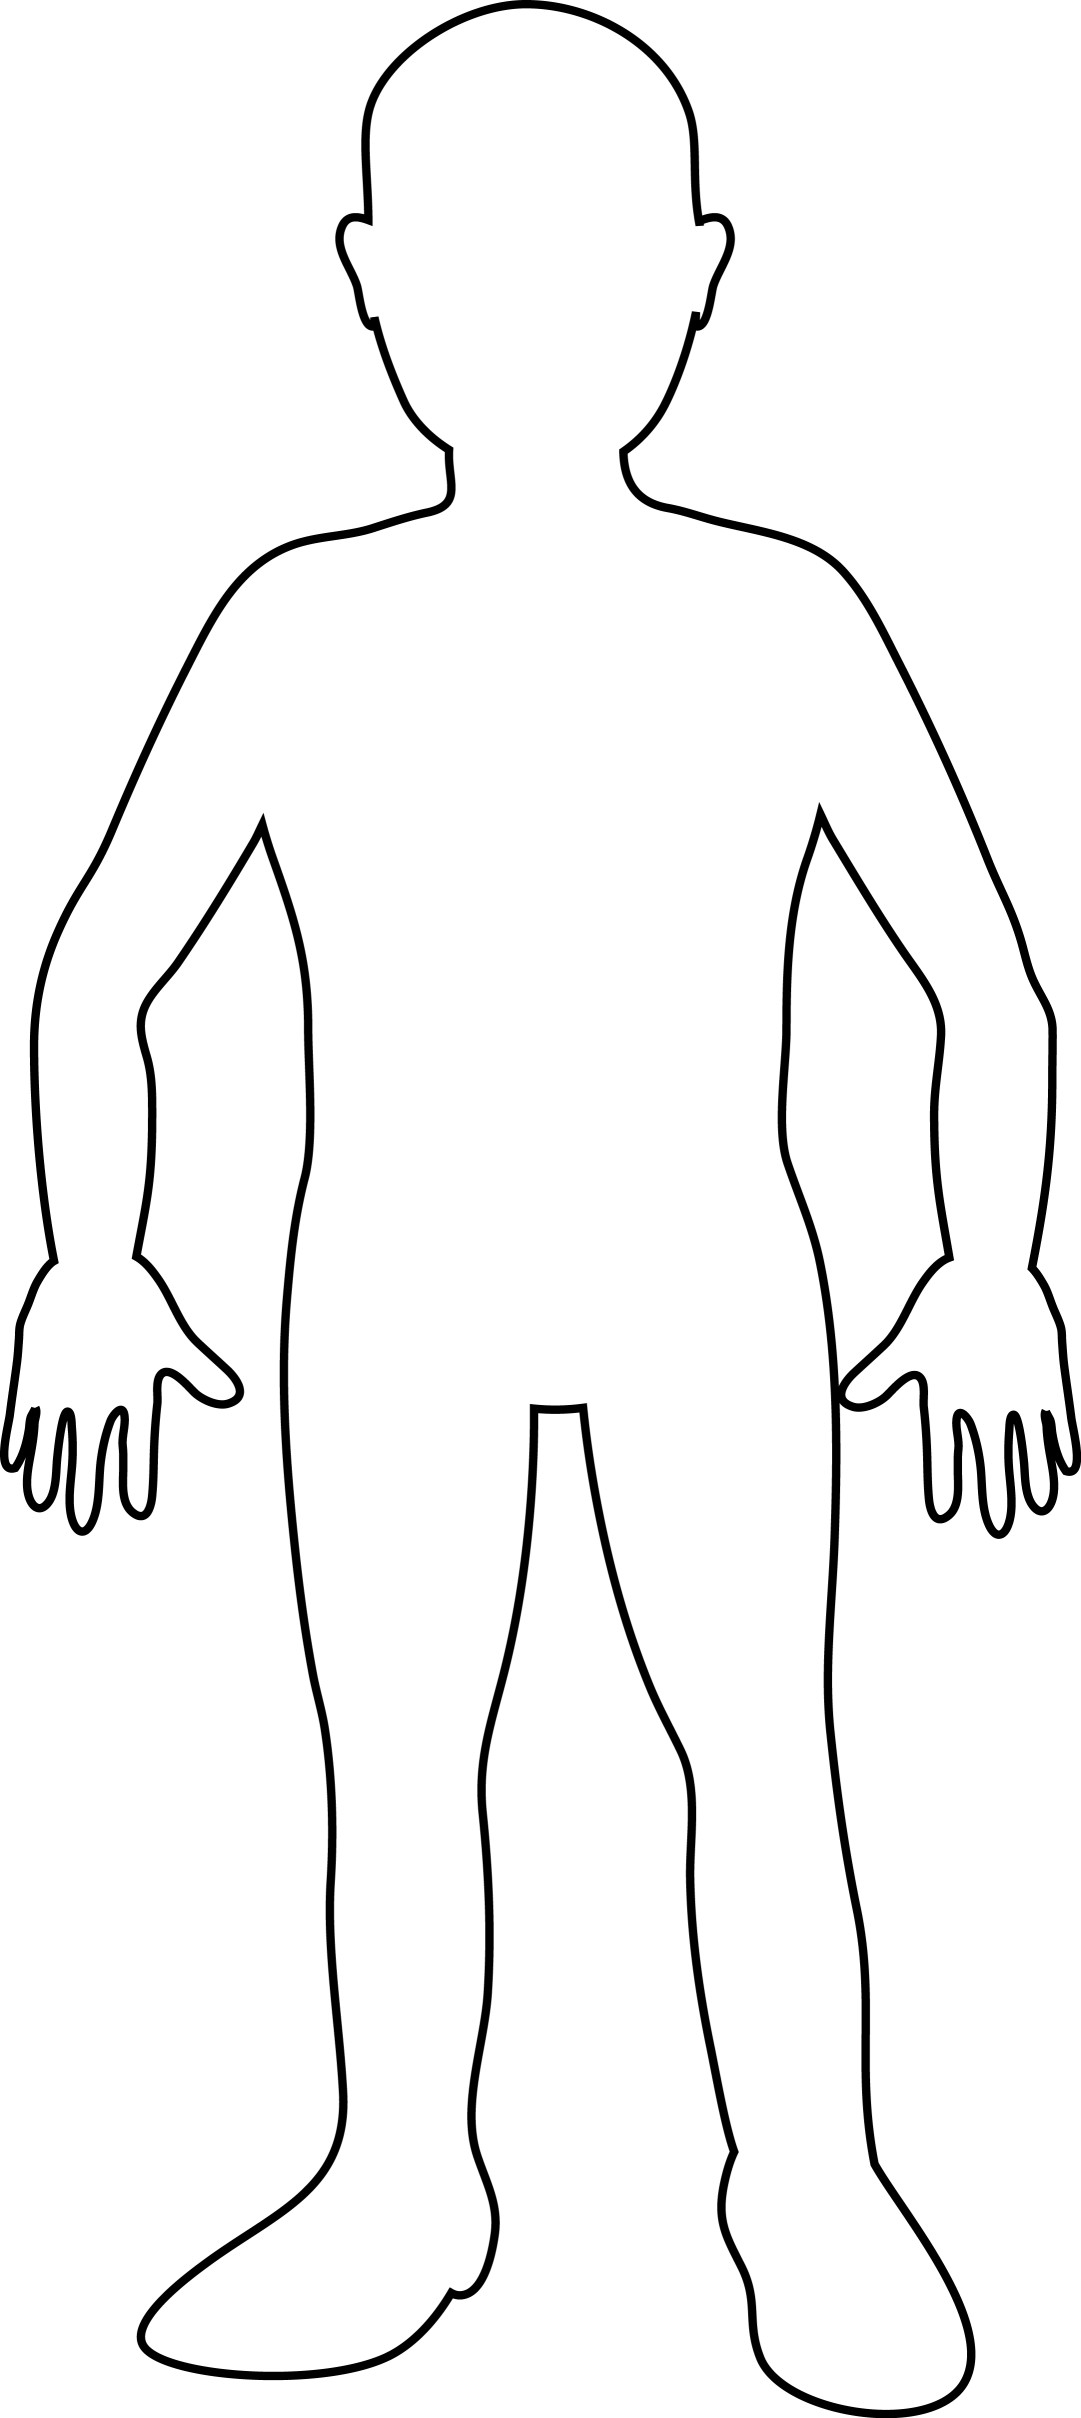 Blank Male Body Template from clipart-library.com